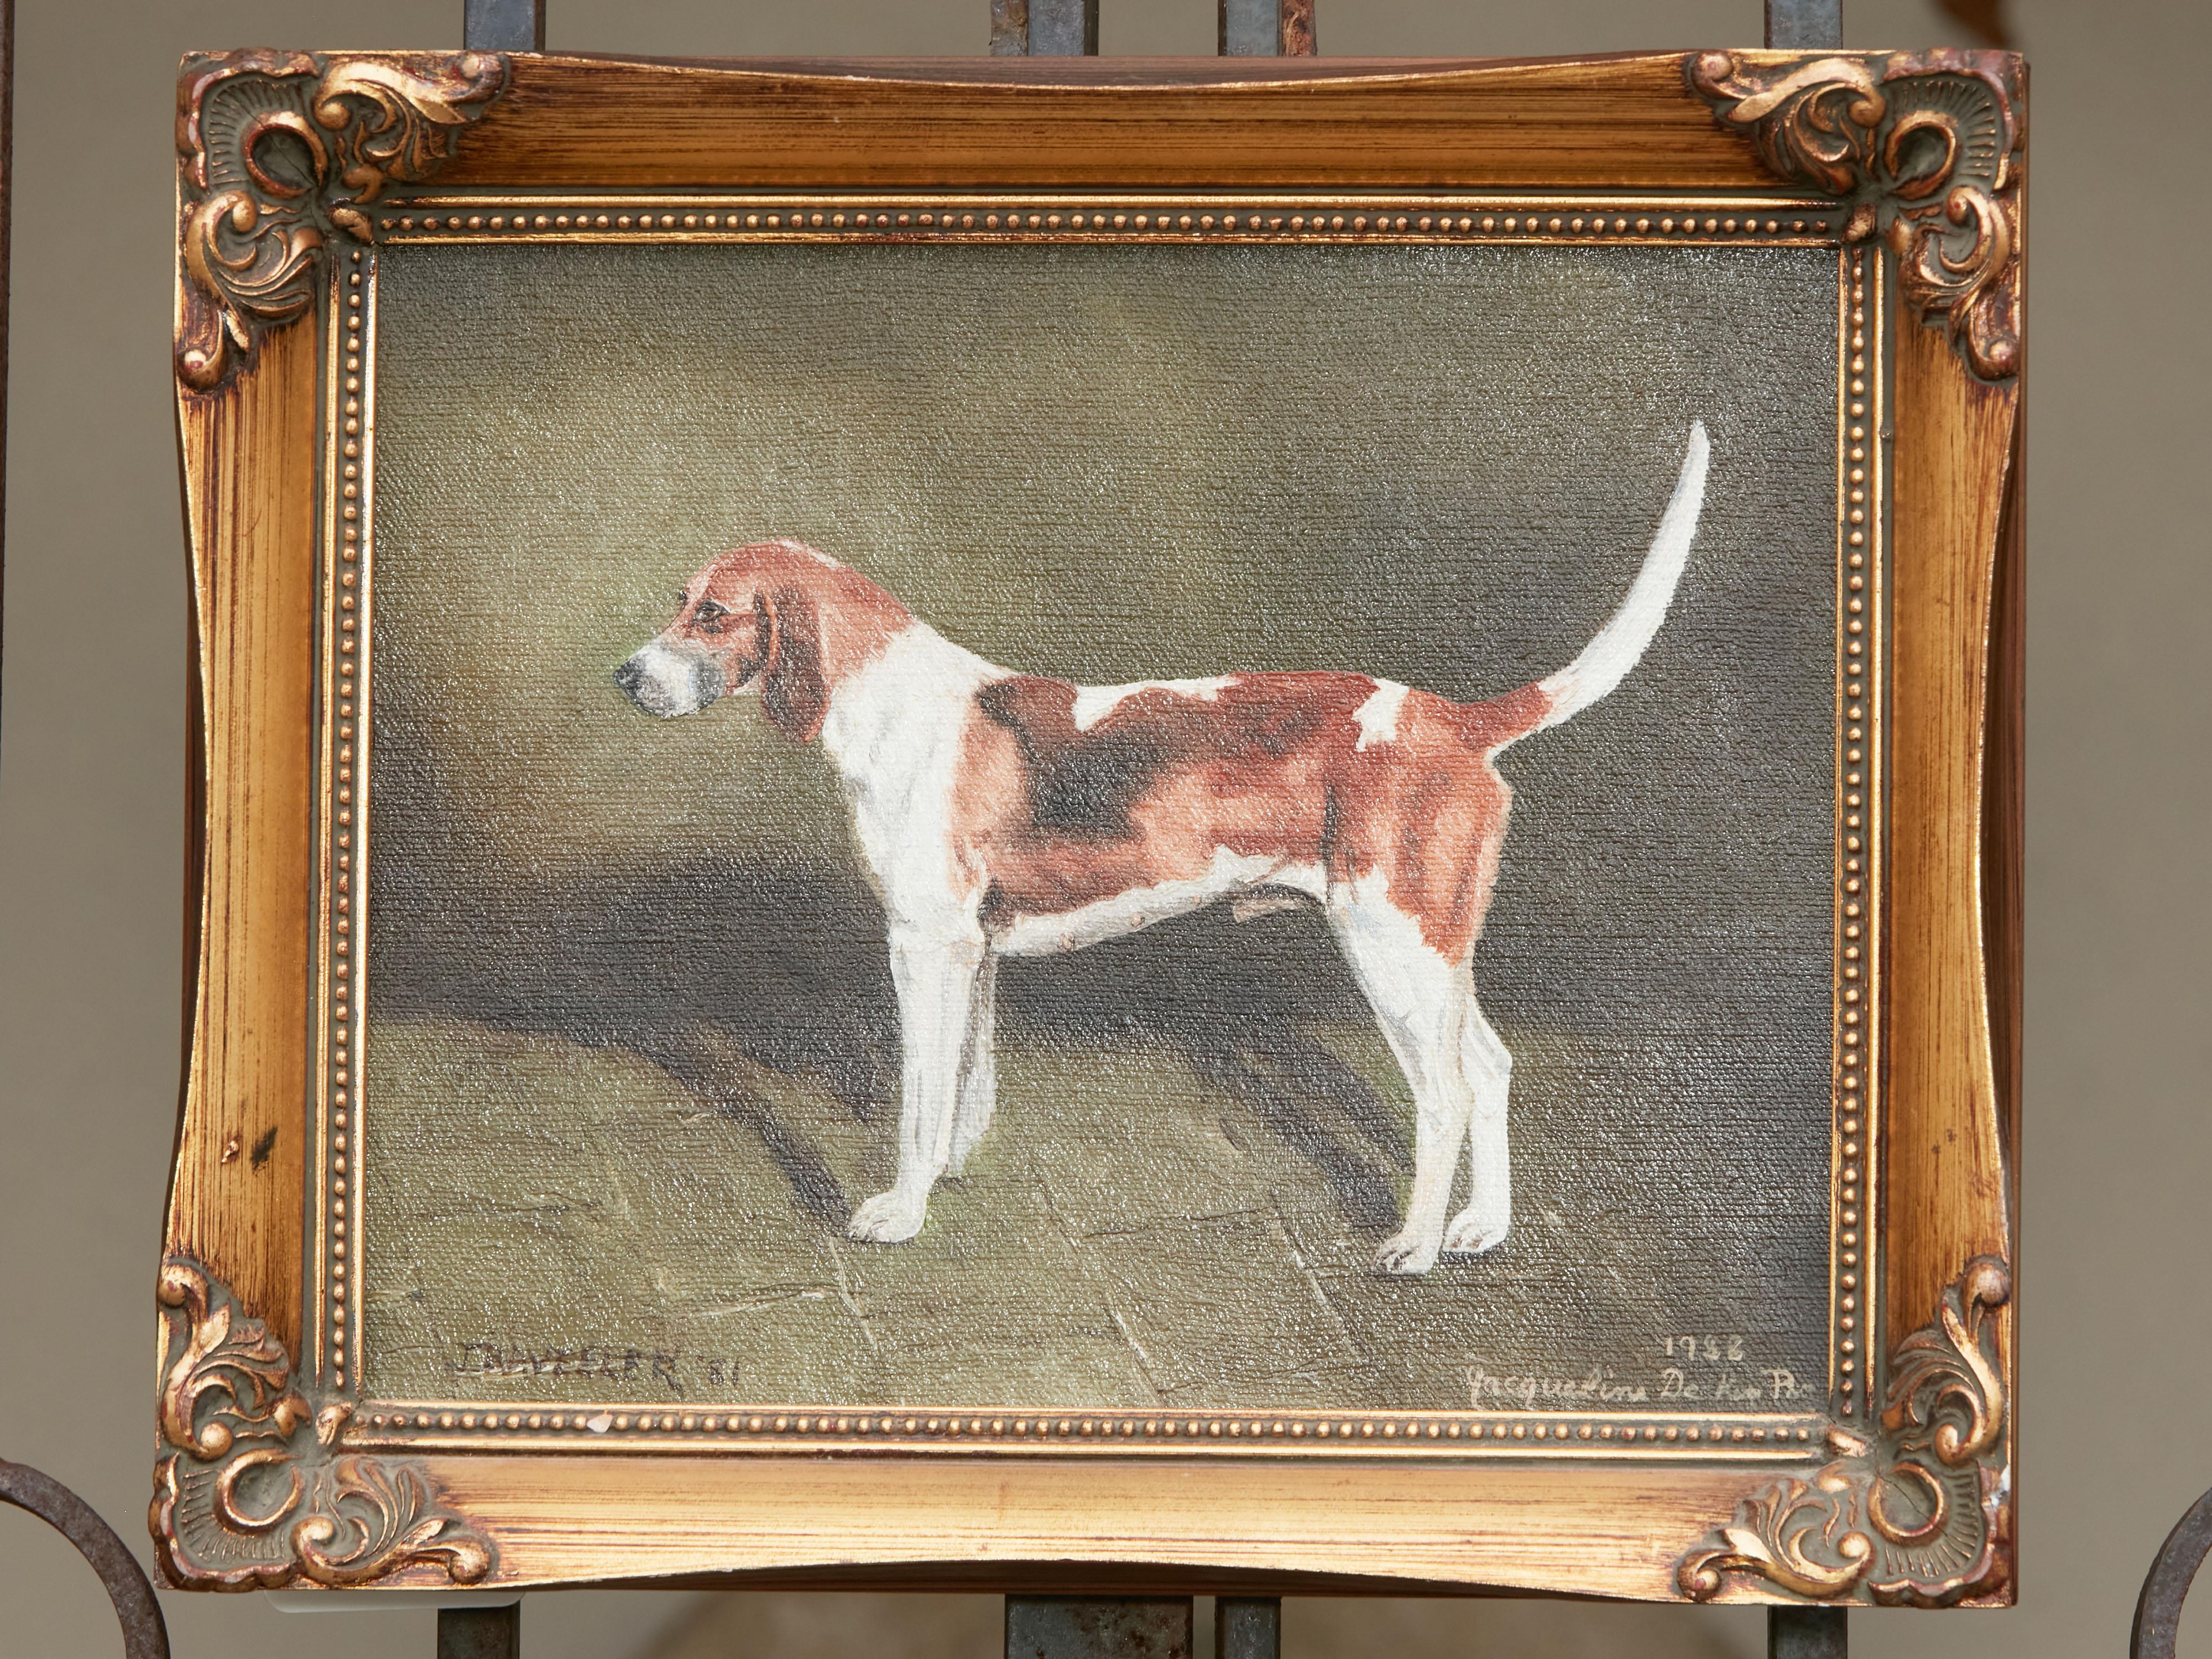 20th Century Oil on Canvas Dog Painting Depicting a Belvoir Hound, Signed Jacqueline Decker